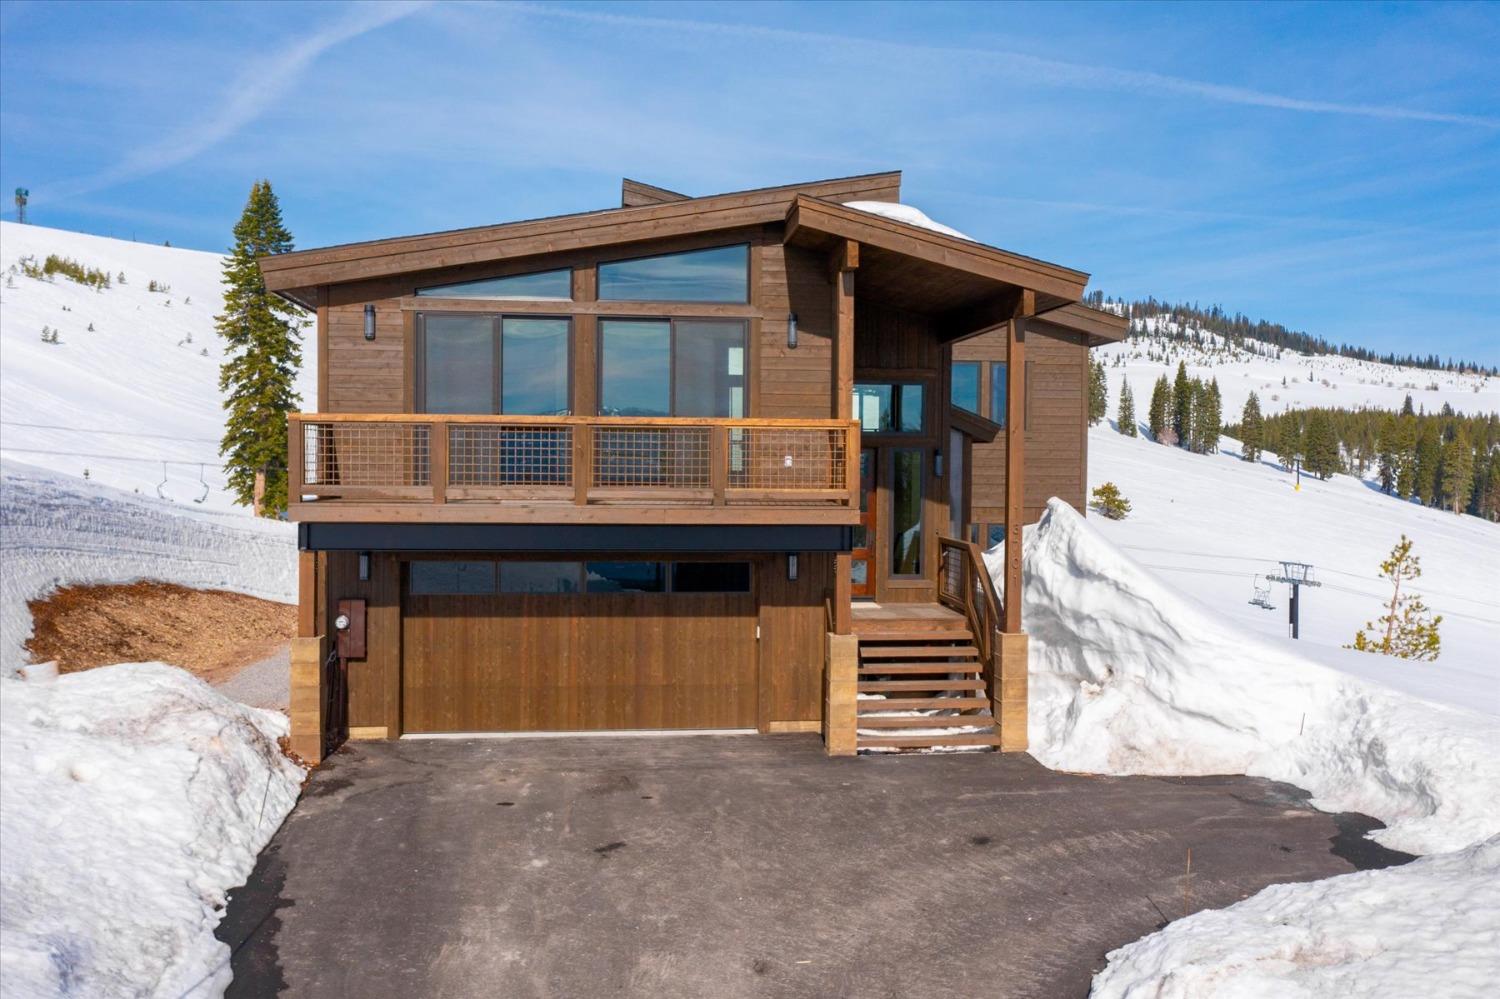 Photo of 13701 Skislope Wy in Truckee, CA